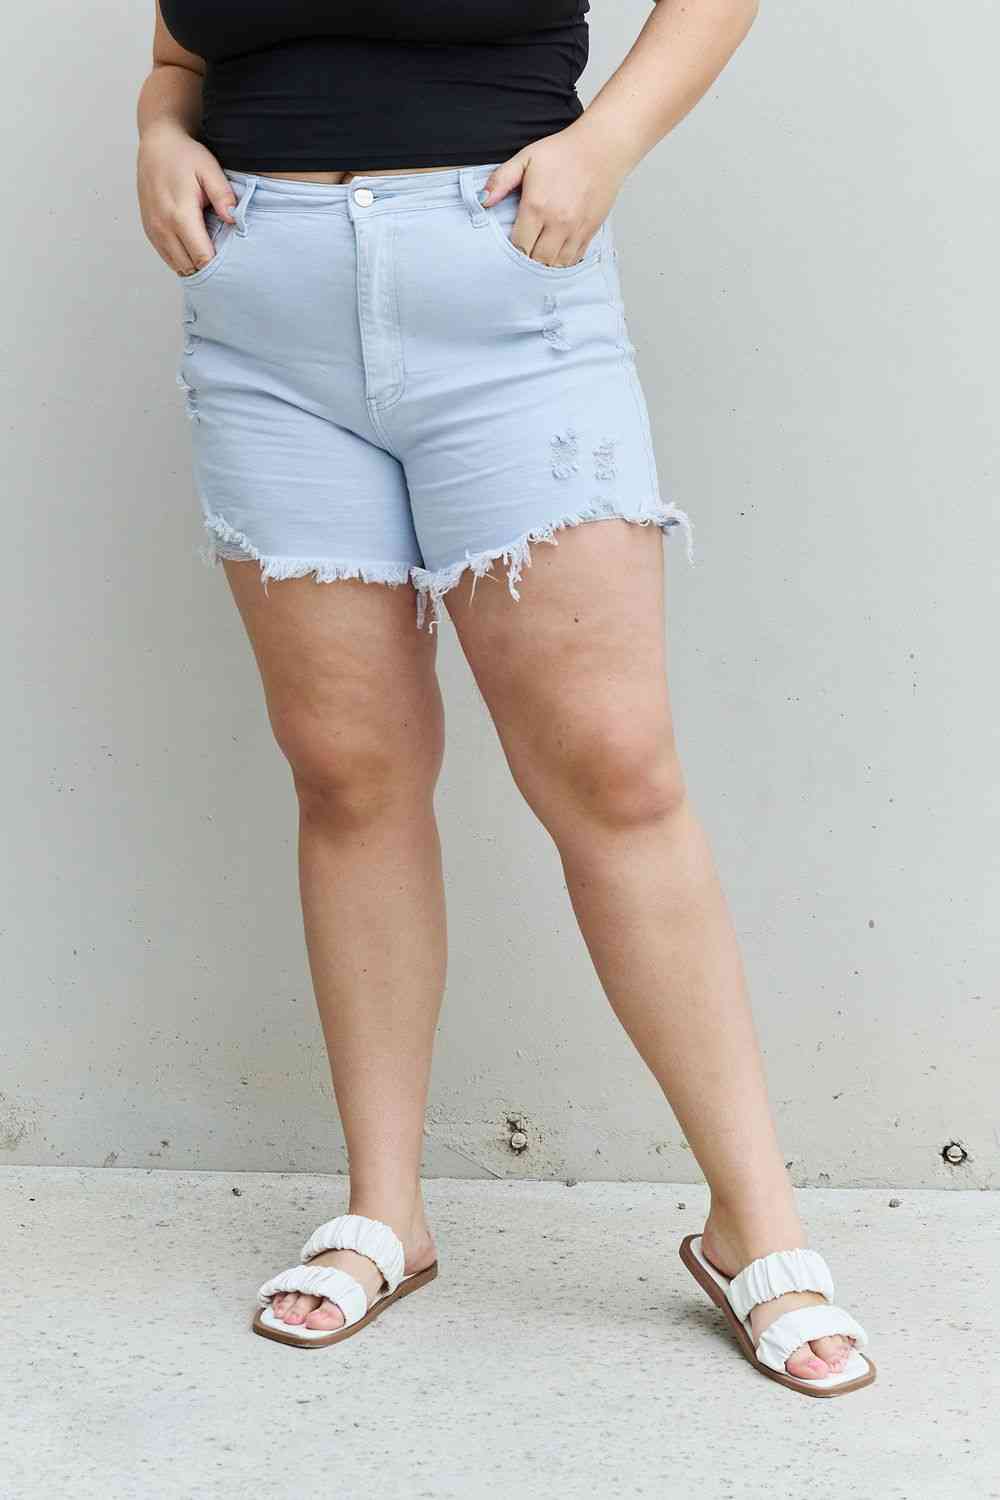 RISEN Katie Full Size High Waisted Distressed Shorts in Ice Blue Light